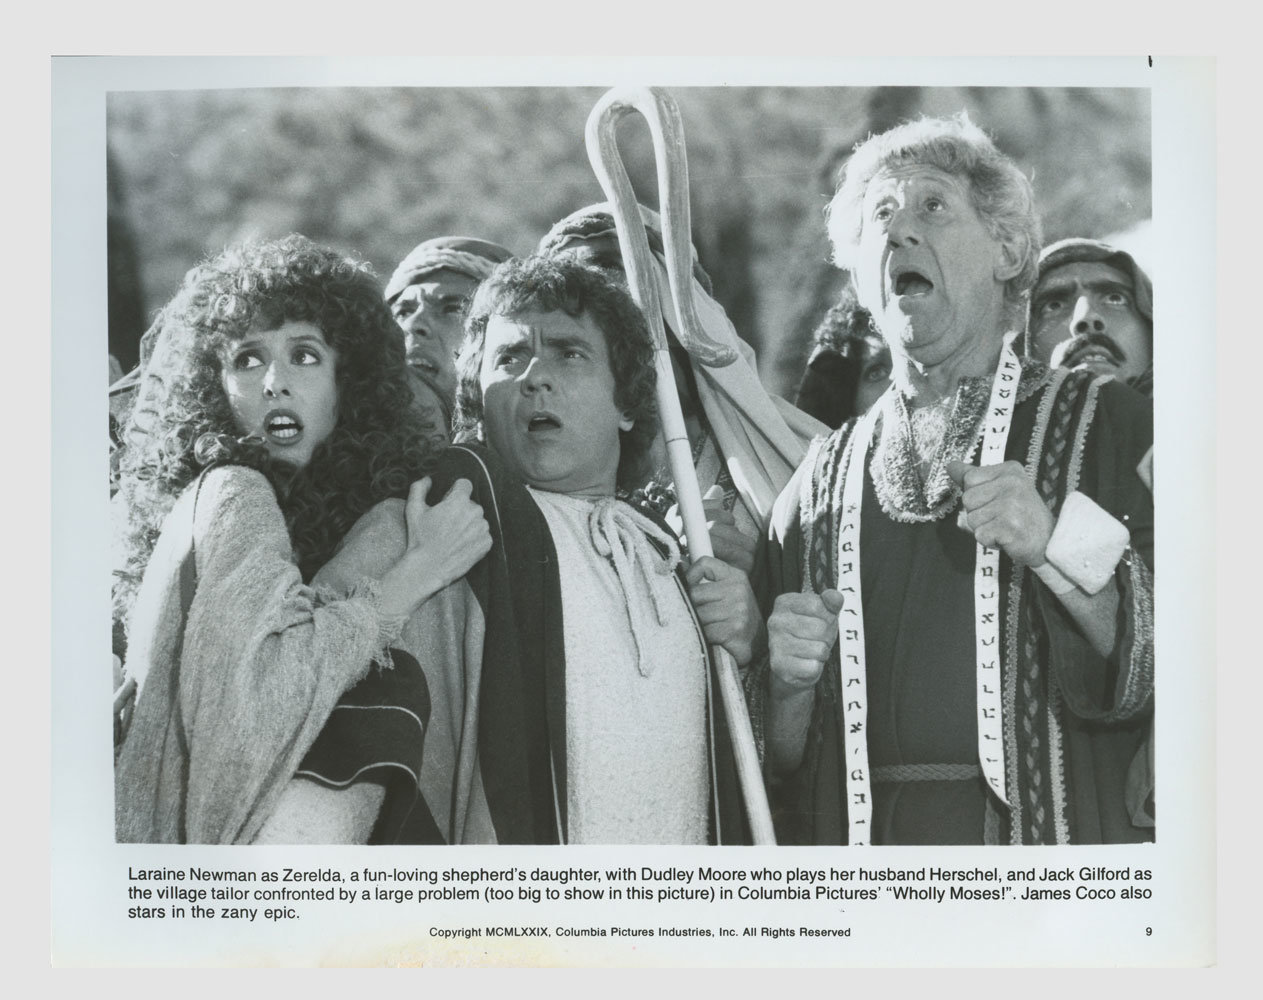 Dudley Moore Laraine Newman Photo 1980 Wholly Moses! Original Vintage